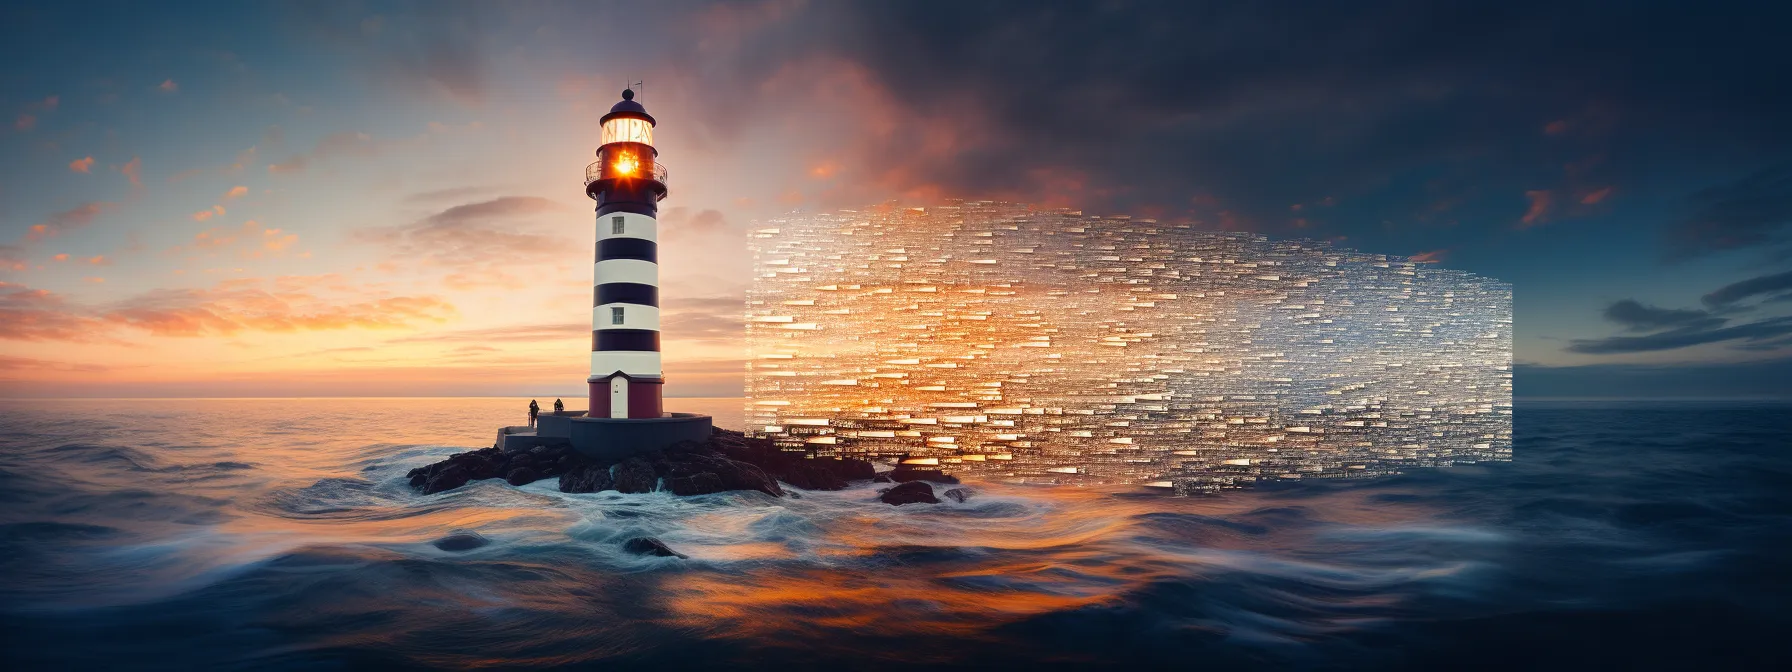 a lighthouse shining brightly over a sea of information, symbolizing the trust signals that google values.